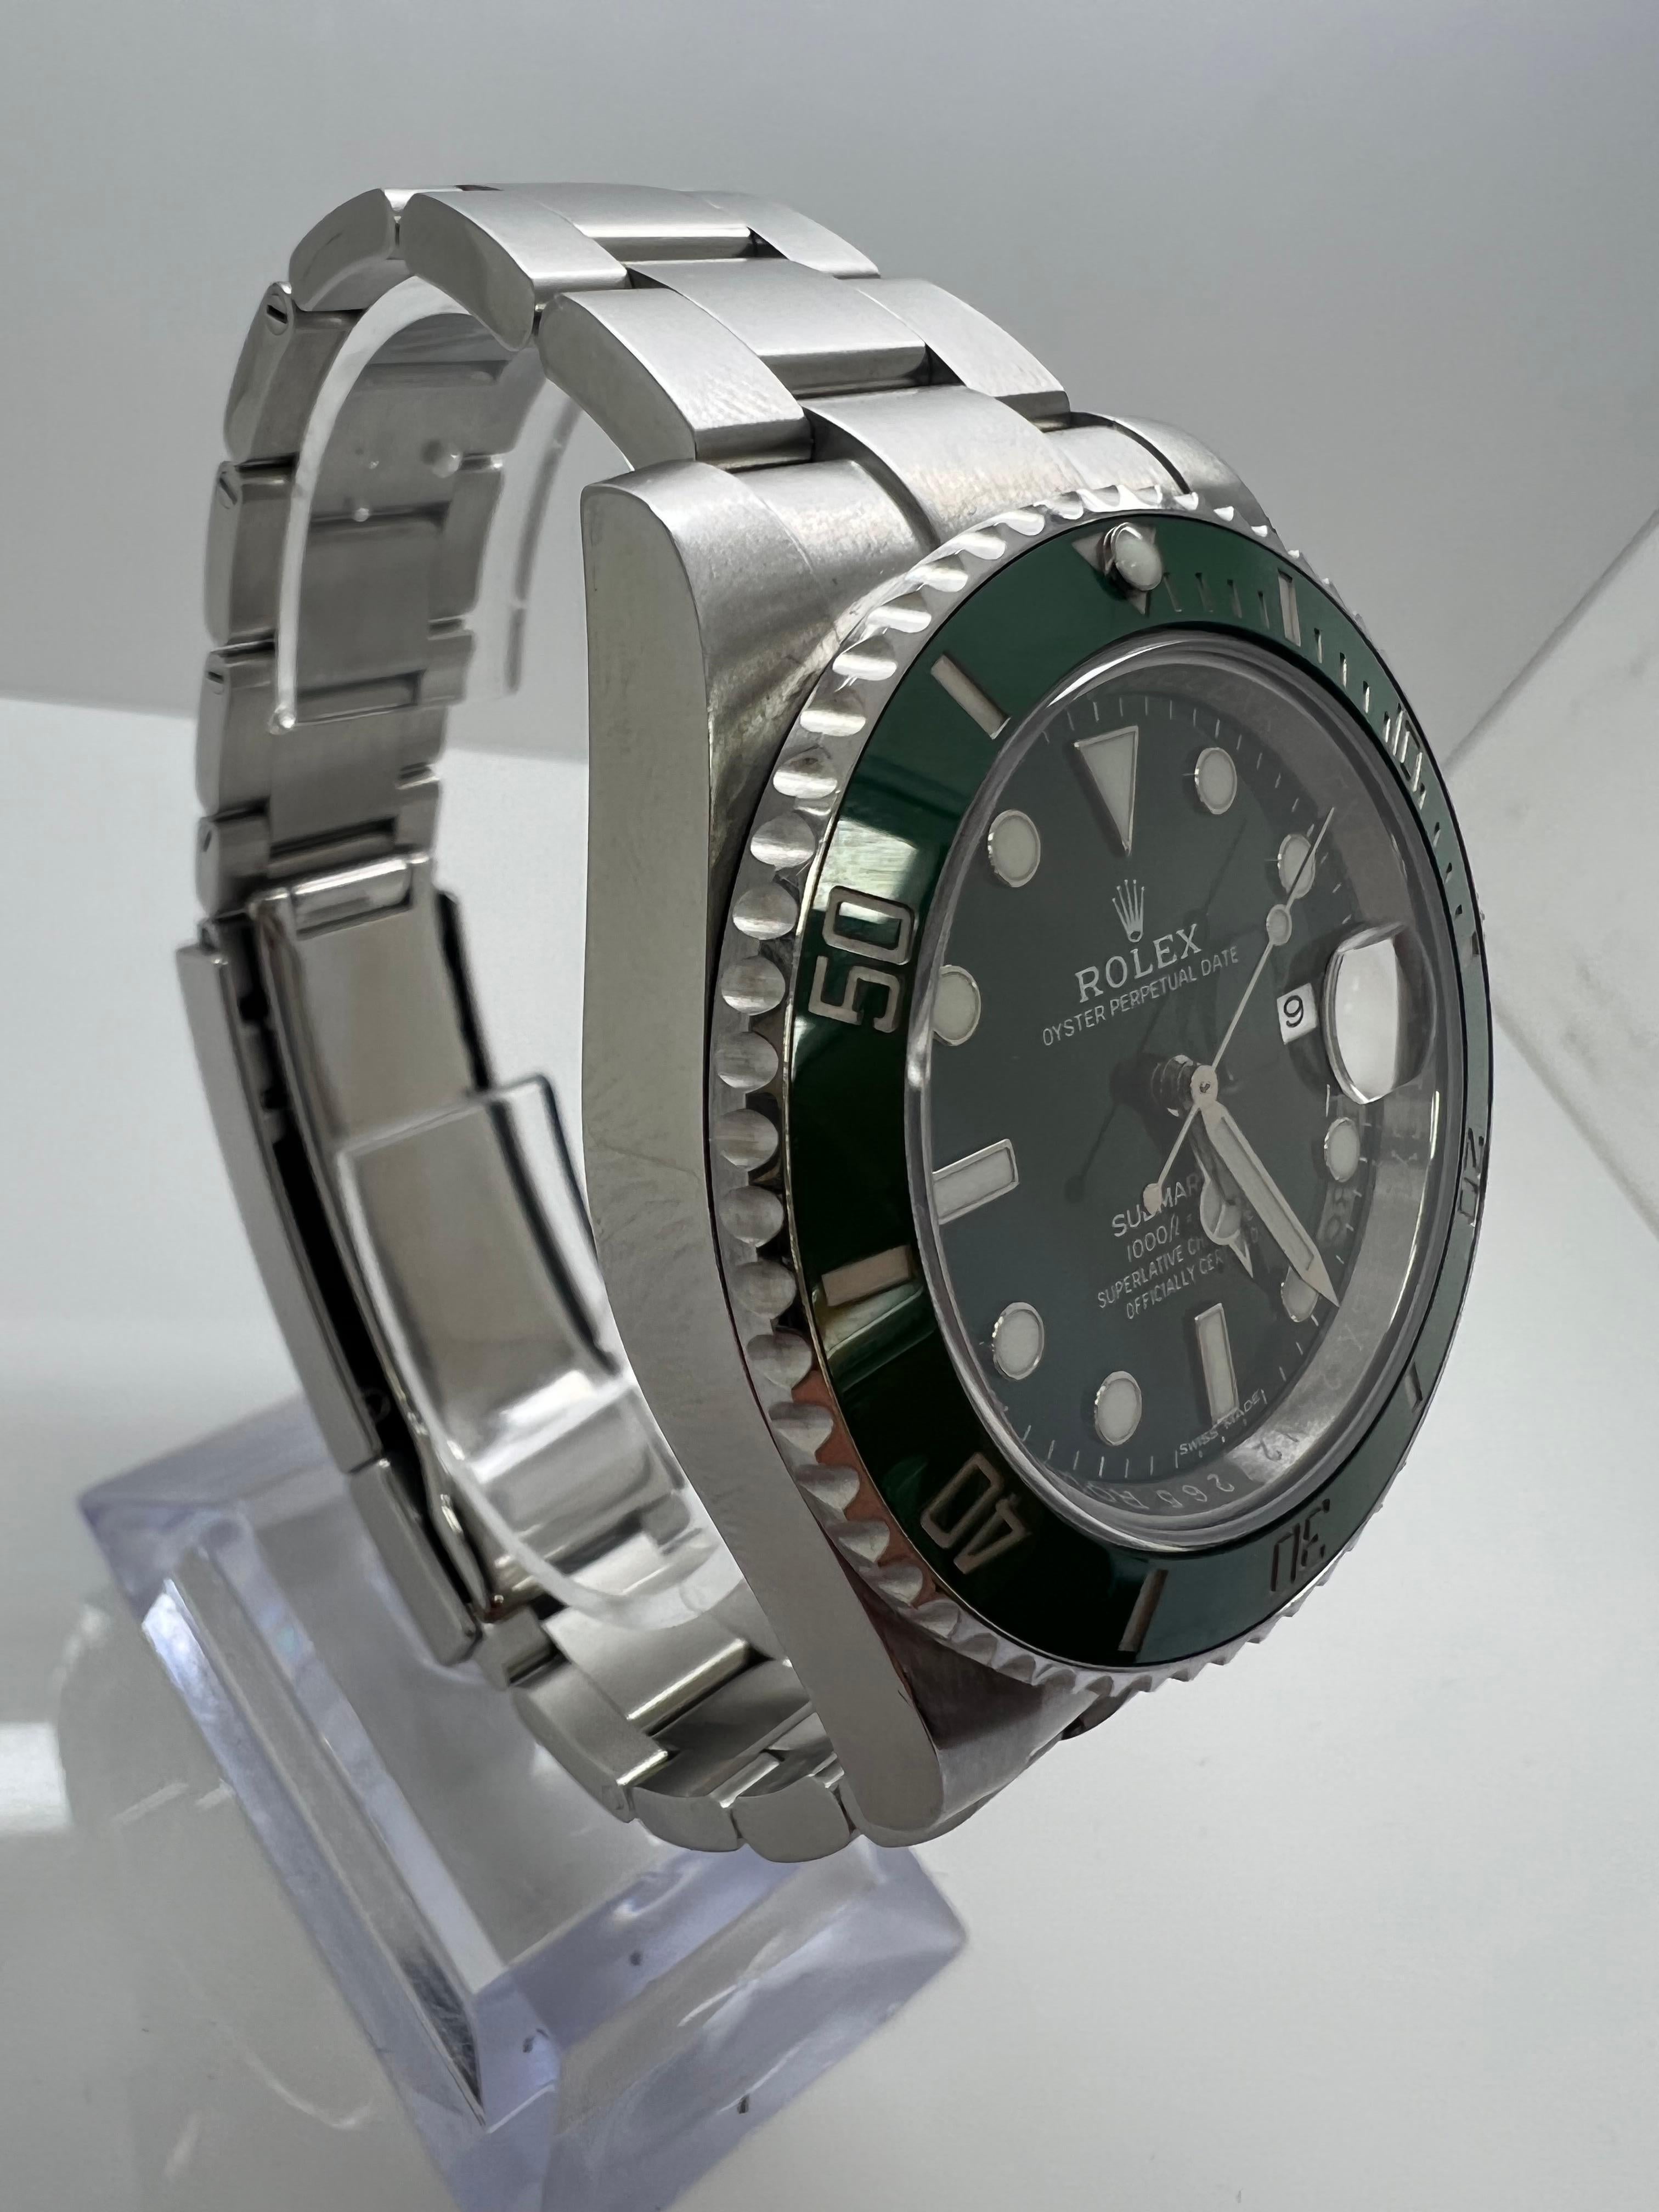 Rolex Submariner Hulk 116610LV Green Ceramic Bezel Watch Box Papers 

Excellent condition

Original Box and Papers Warranty Card

all original Rolex parts

40mm case

2 year warranty on movement for first time customers

shop with confidence 

Evita